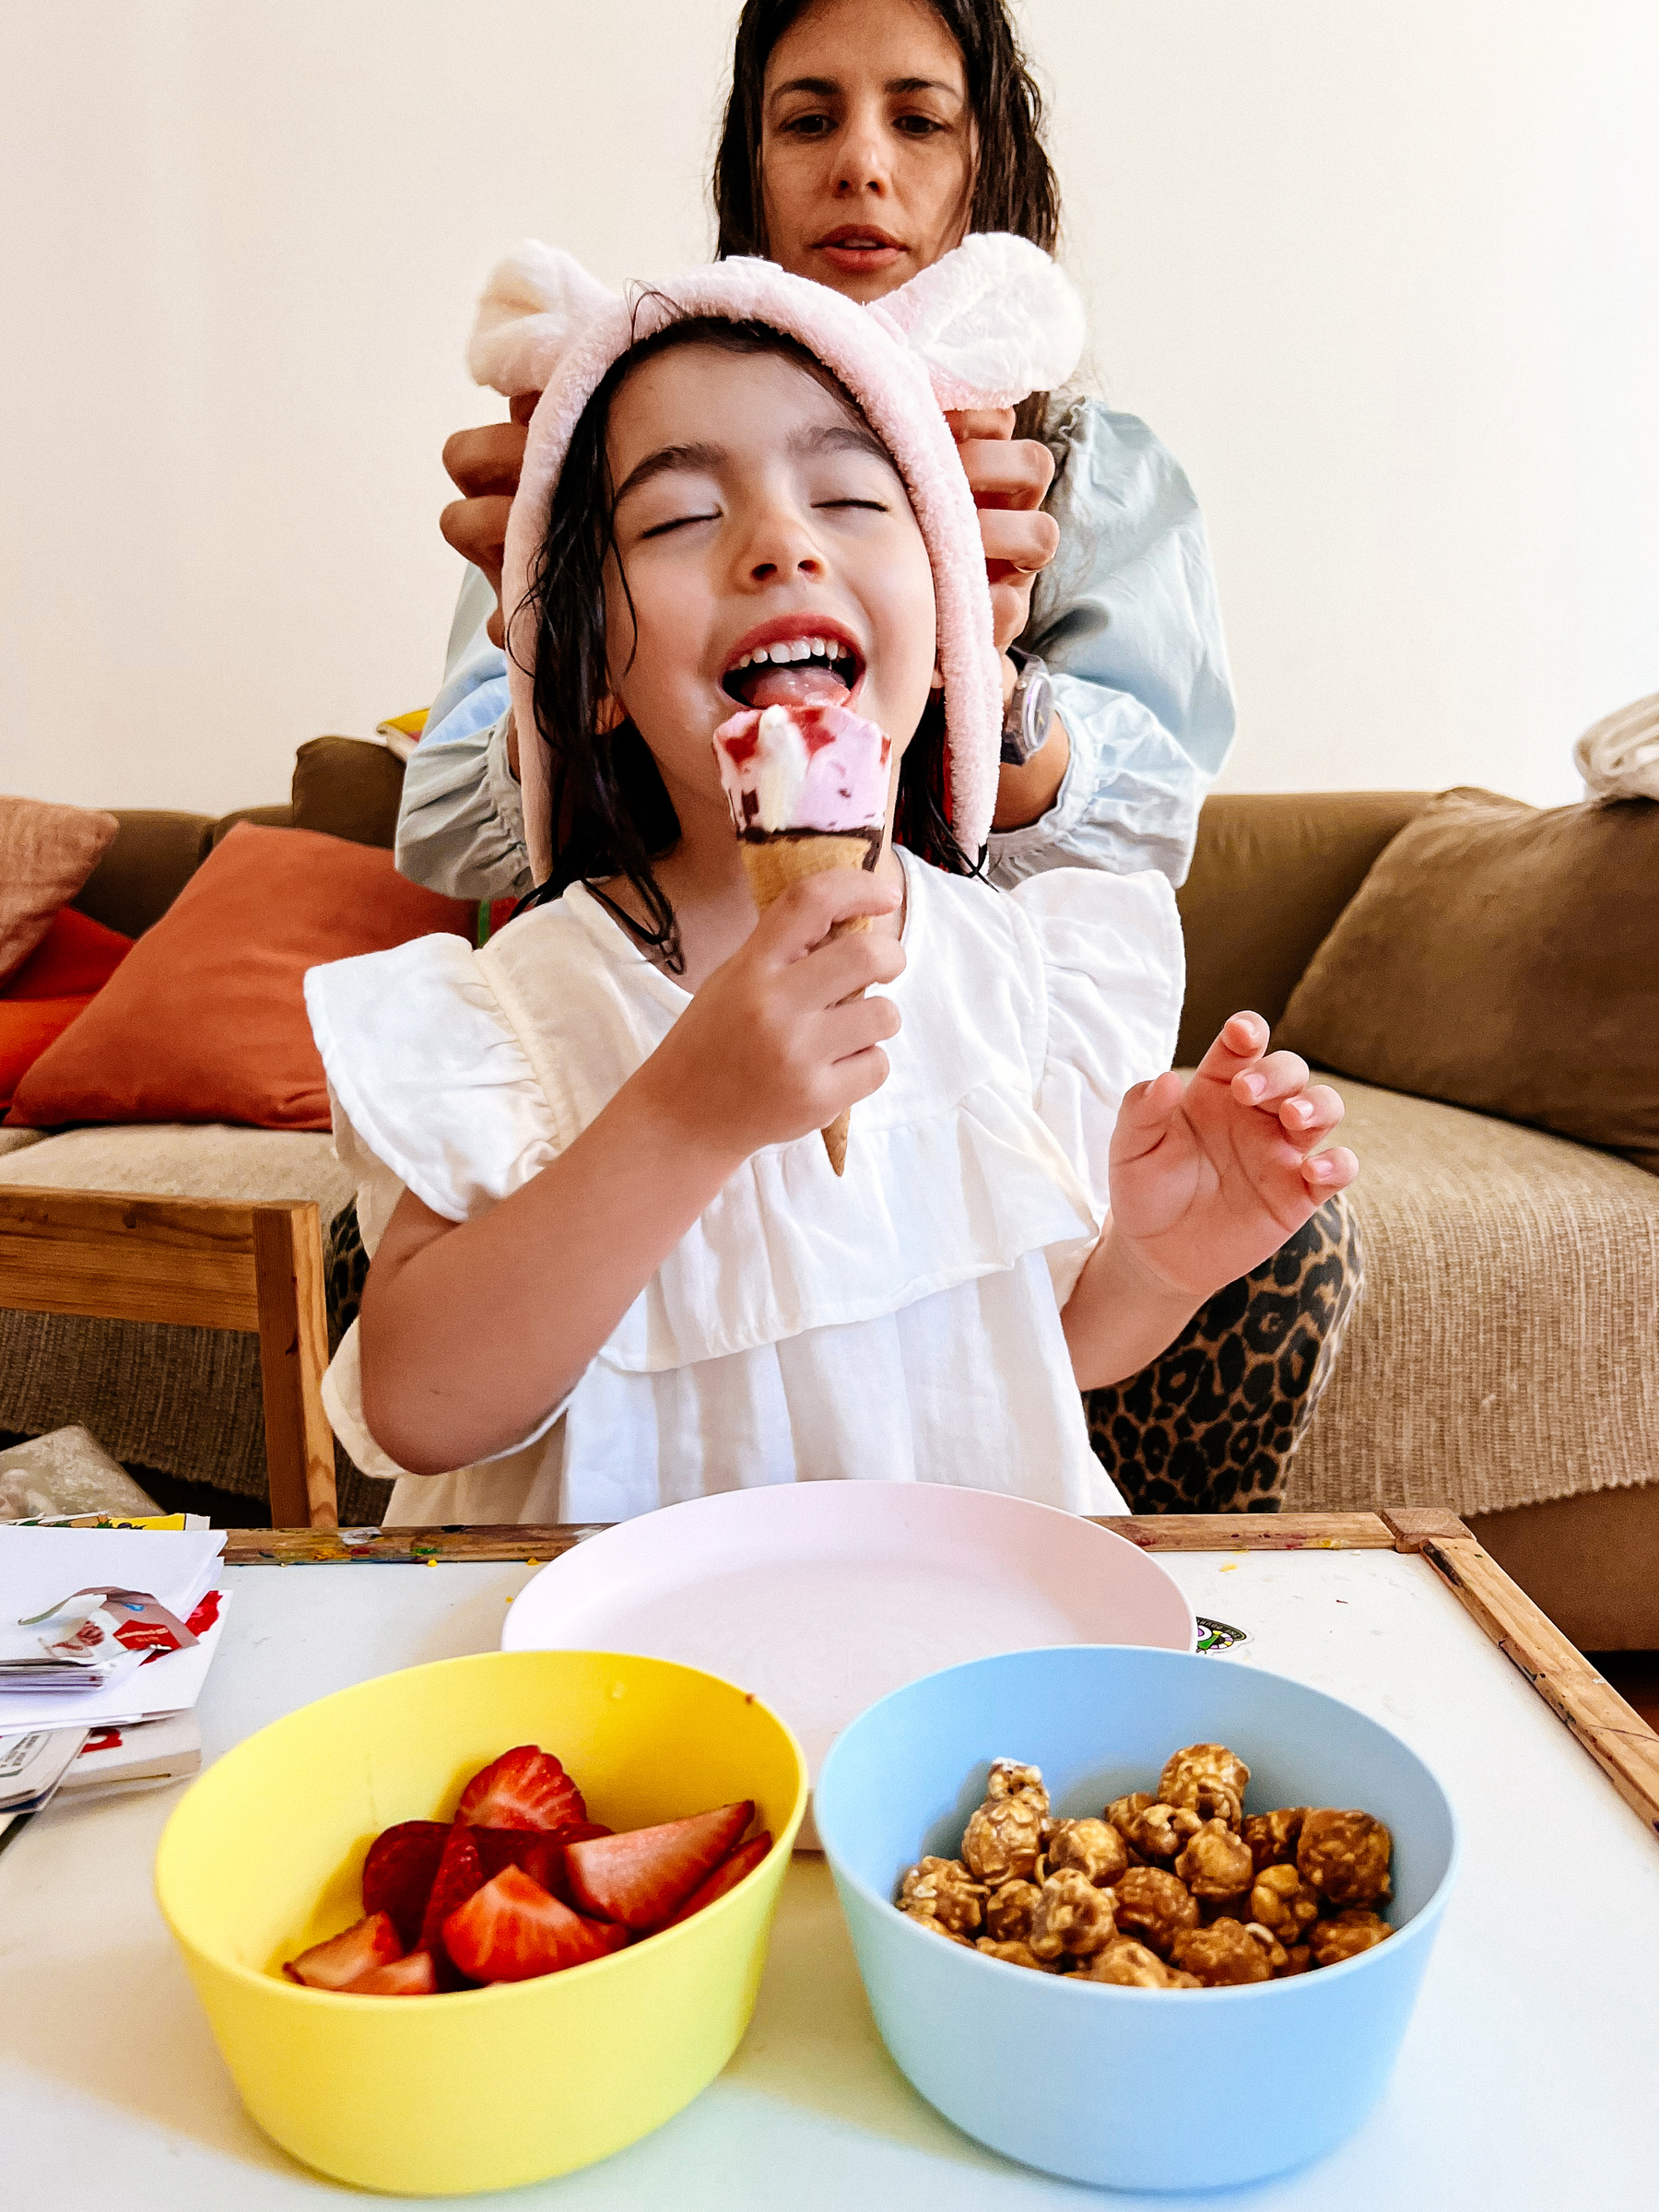 A young girl enjoys an ice cream cone with her eyes closed in delight while an adult woman adjusts a headband with bunny ears on the girl's head. In the foreground, there are two bowls, one with strawberries and the other with caramel-coated popcorn. 